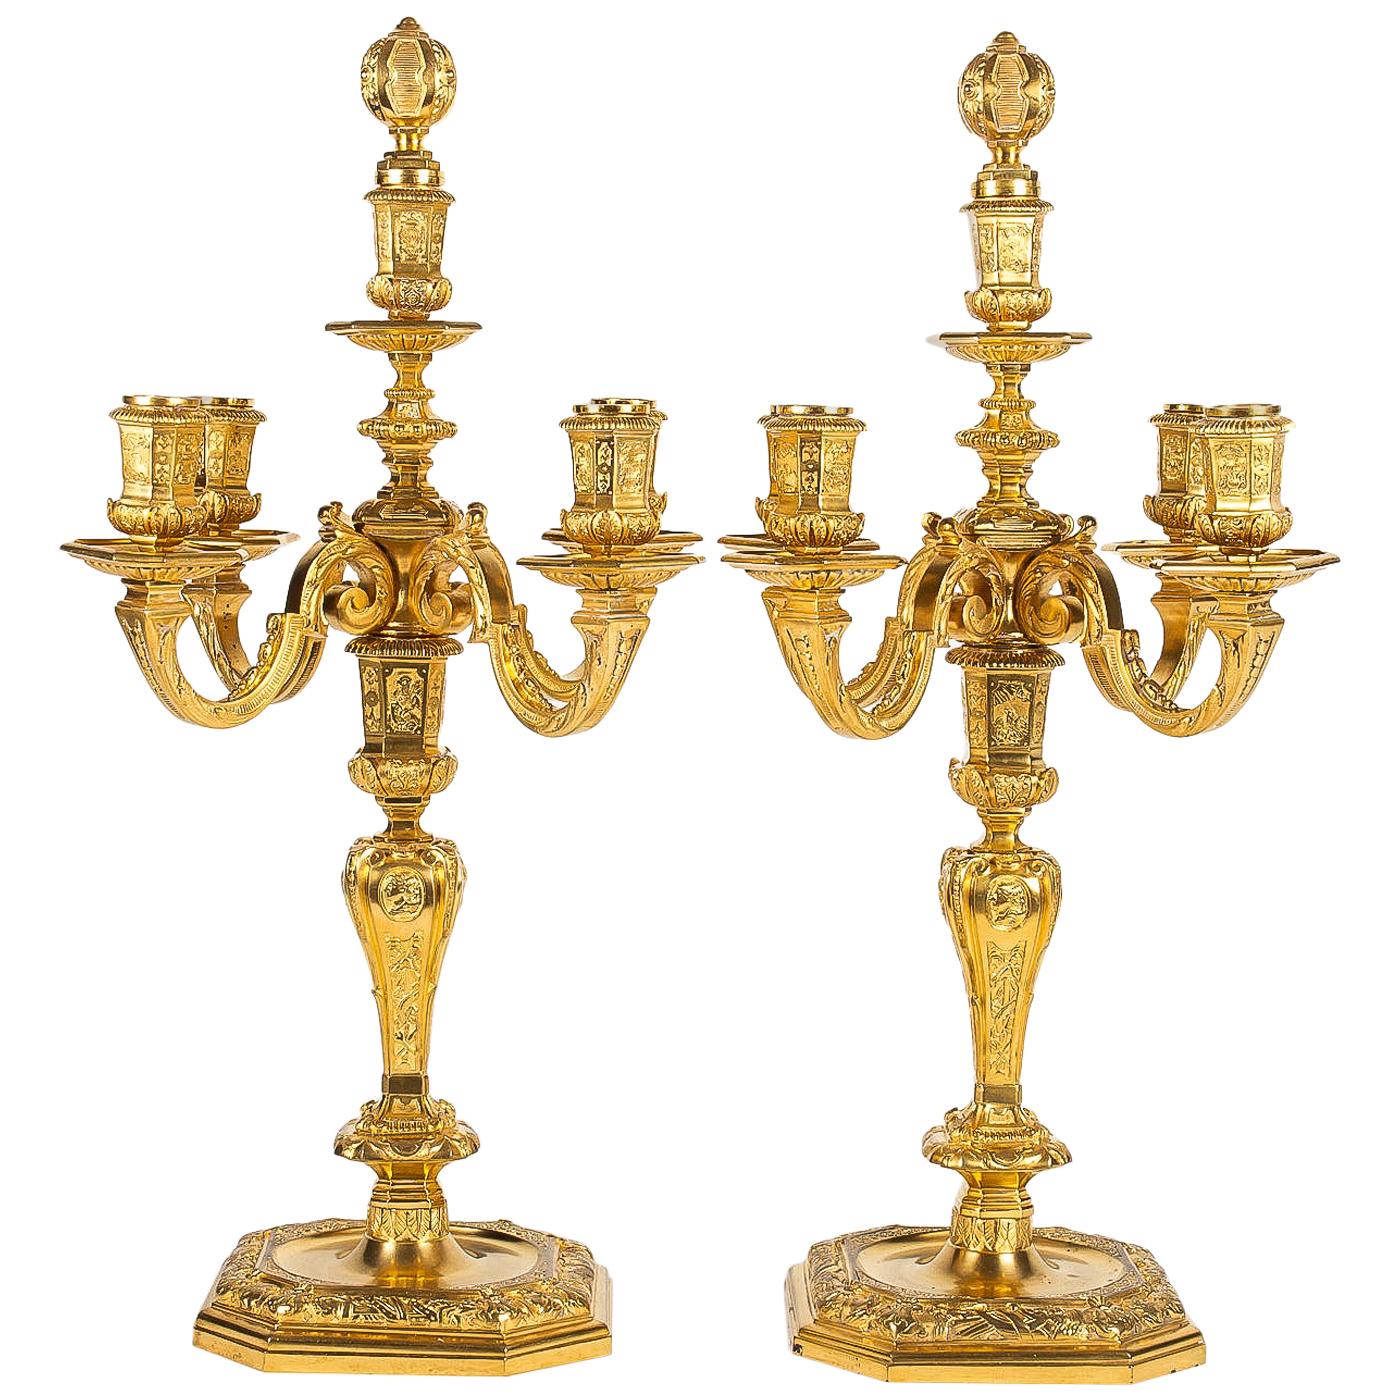 by H Voisenet, Large Pair of Louis XIV Style Ormolu Candelabras, circa 1880-1900